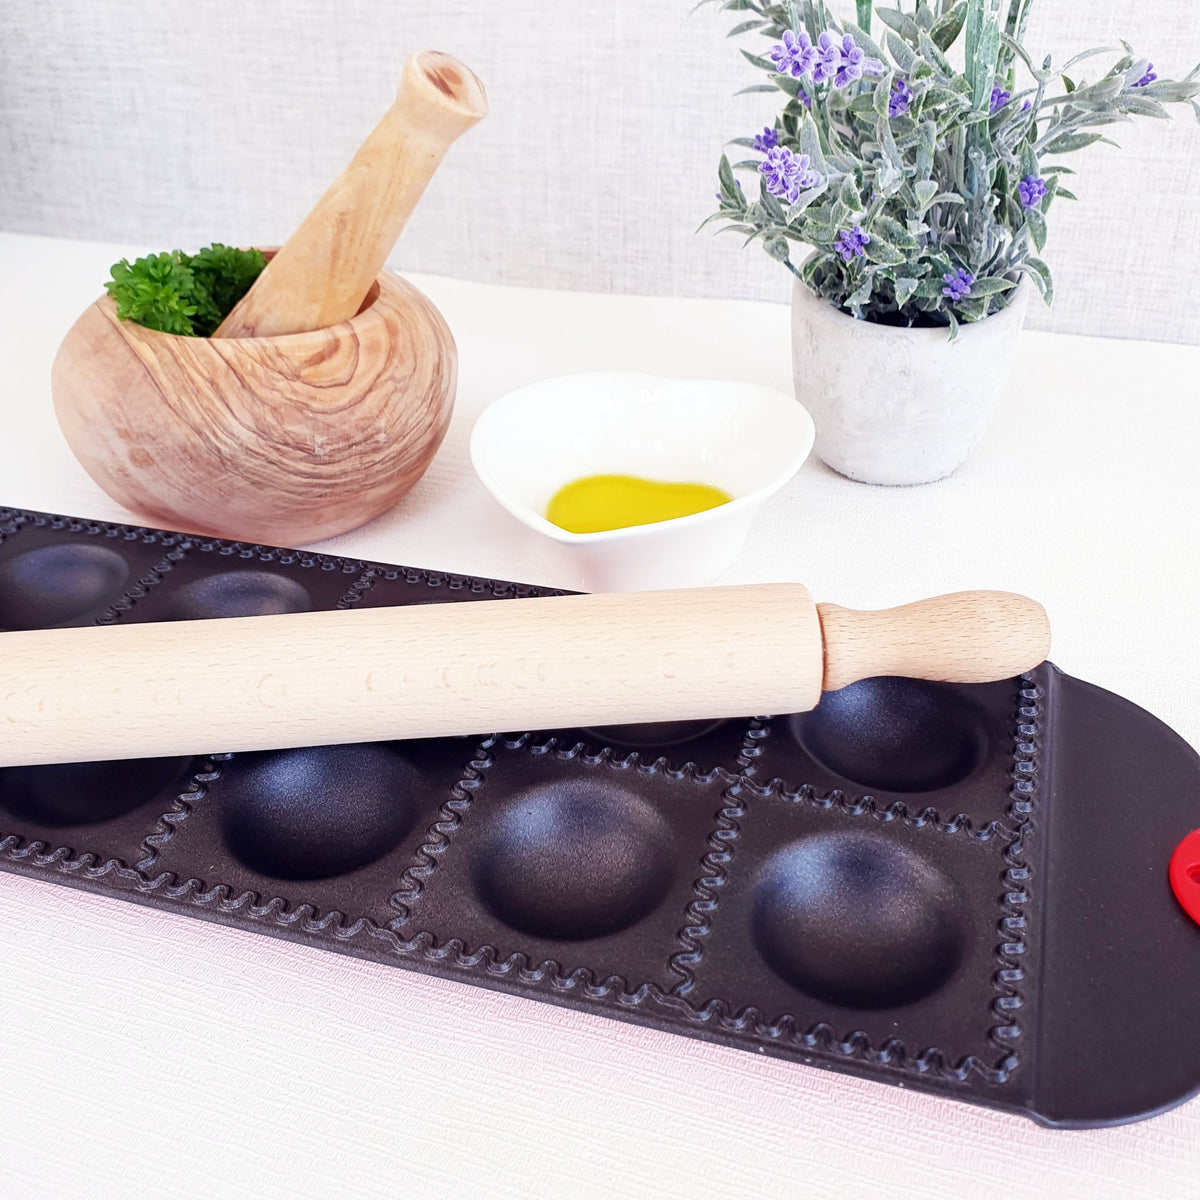 Ravioli Cutting Tray with rollin gpin on top and pestle and mortar in background